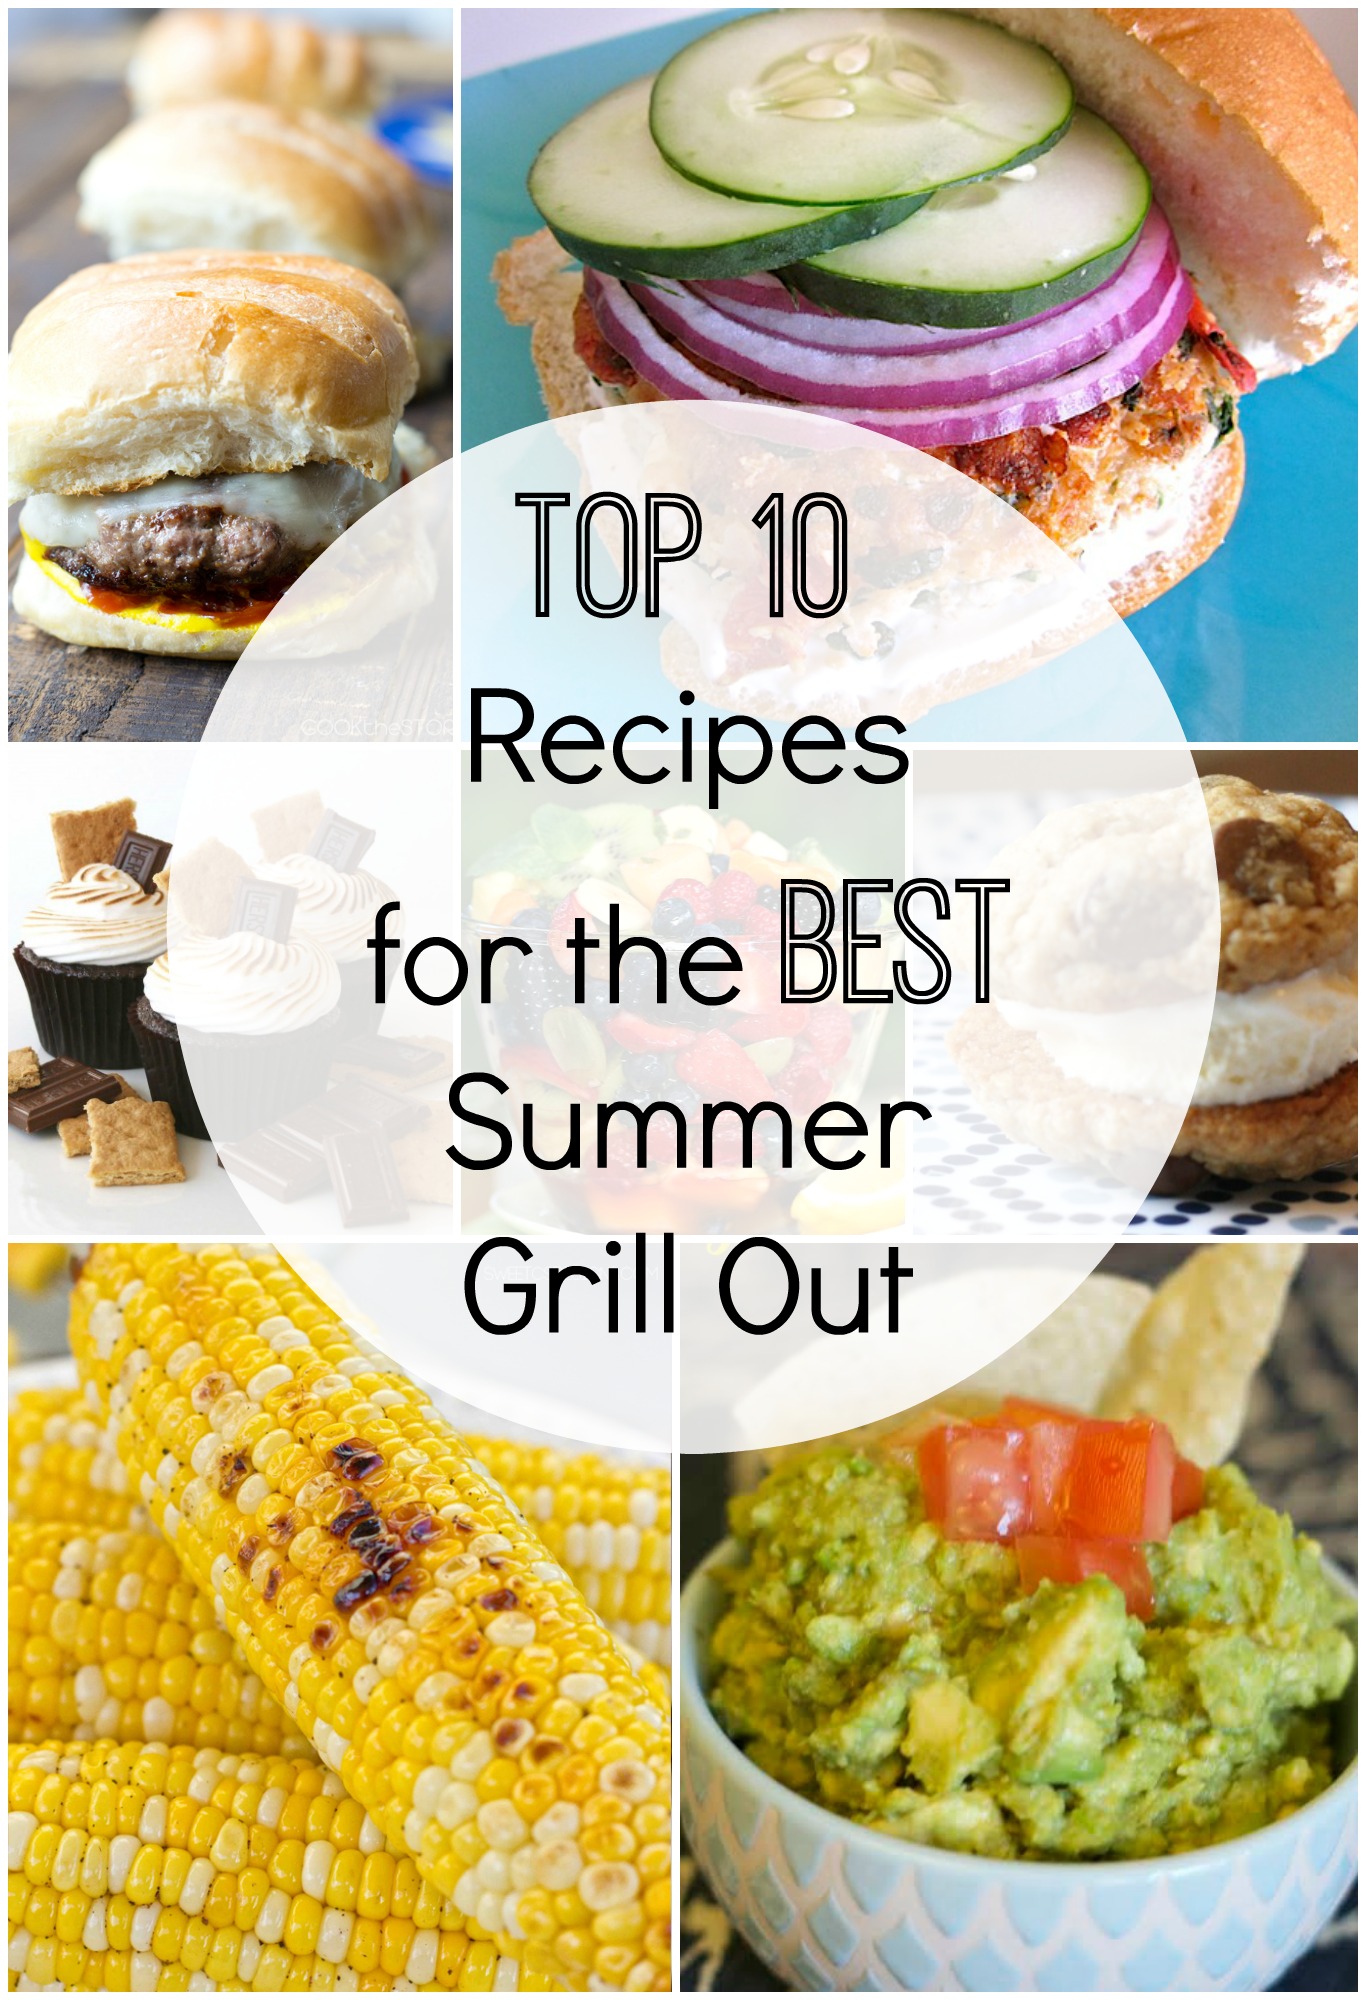 Top 10 Recipes for the Best Summer Grill Out